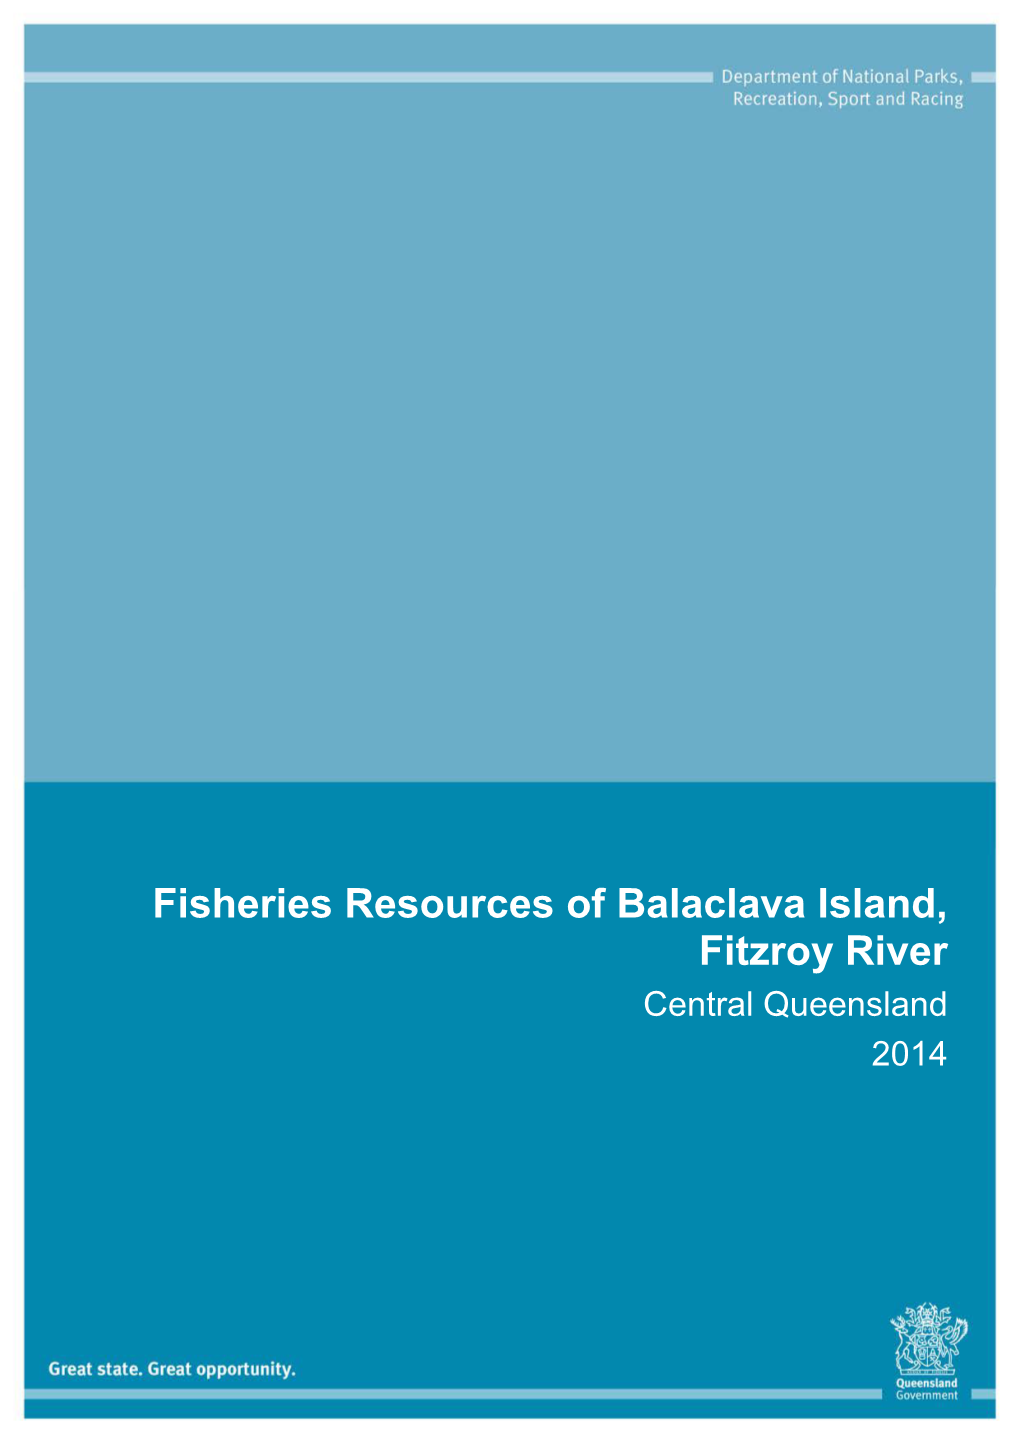 Fisheries Resources of Balaclava Island, Fitzroy River Central Queensland 2014